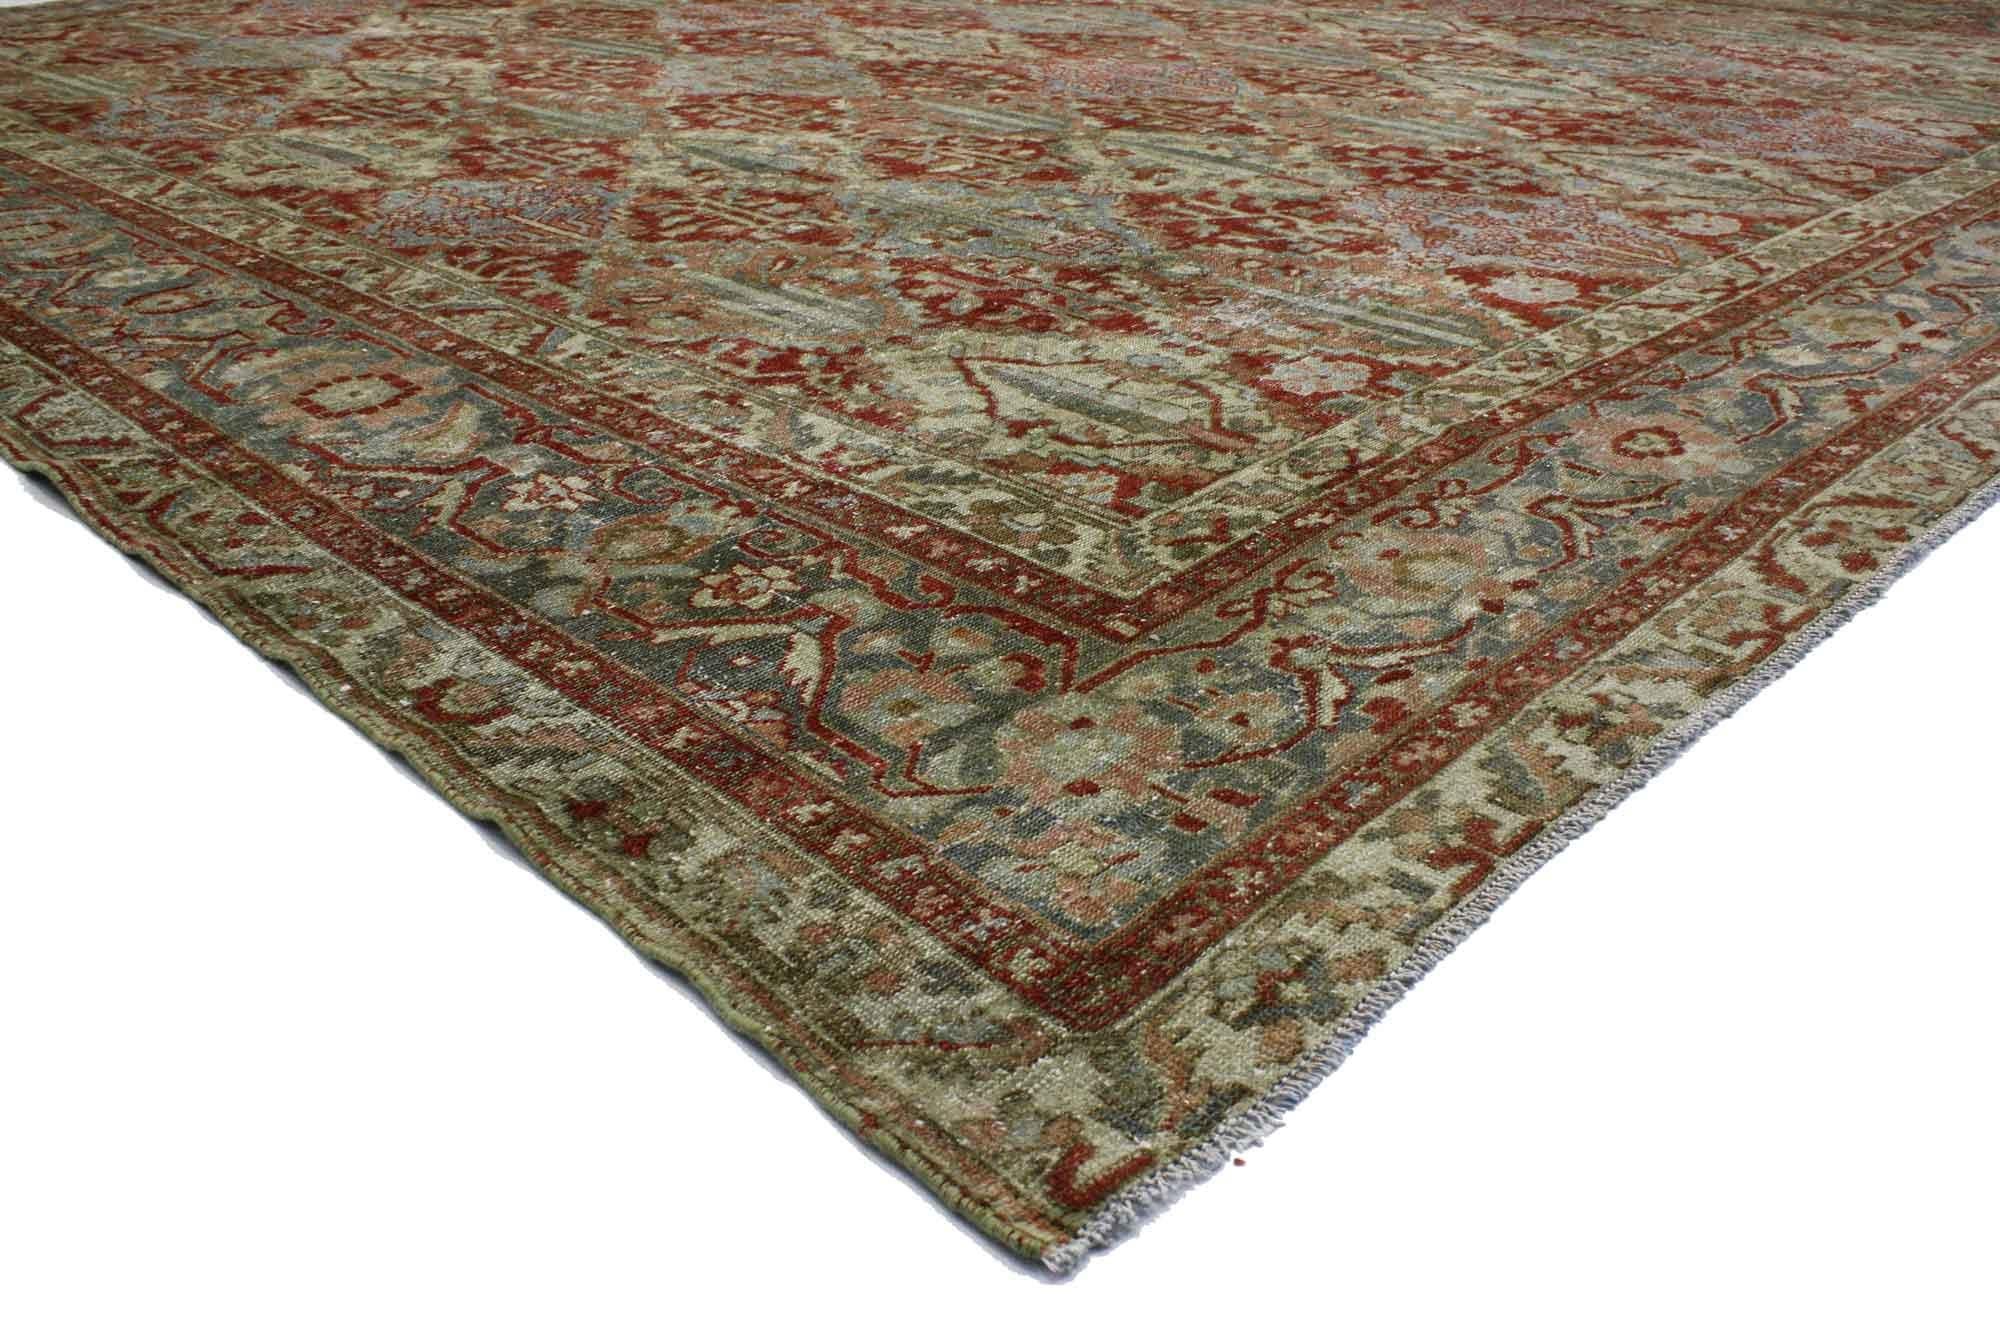 51528 Antique Persian Bakhtiari Rug 12'02 x 14'04.
Cleverly composed and distinctively well-balanced, this hand knotted wool distressed antique Persian Bakhtiari rug will take on a curated lived-in look that feels timeless while imparting a sense of